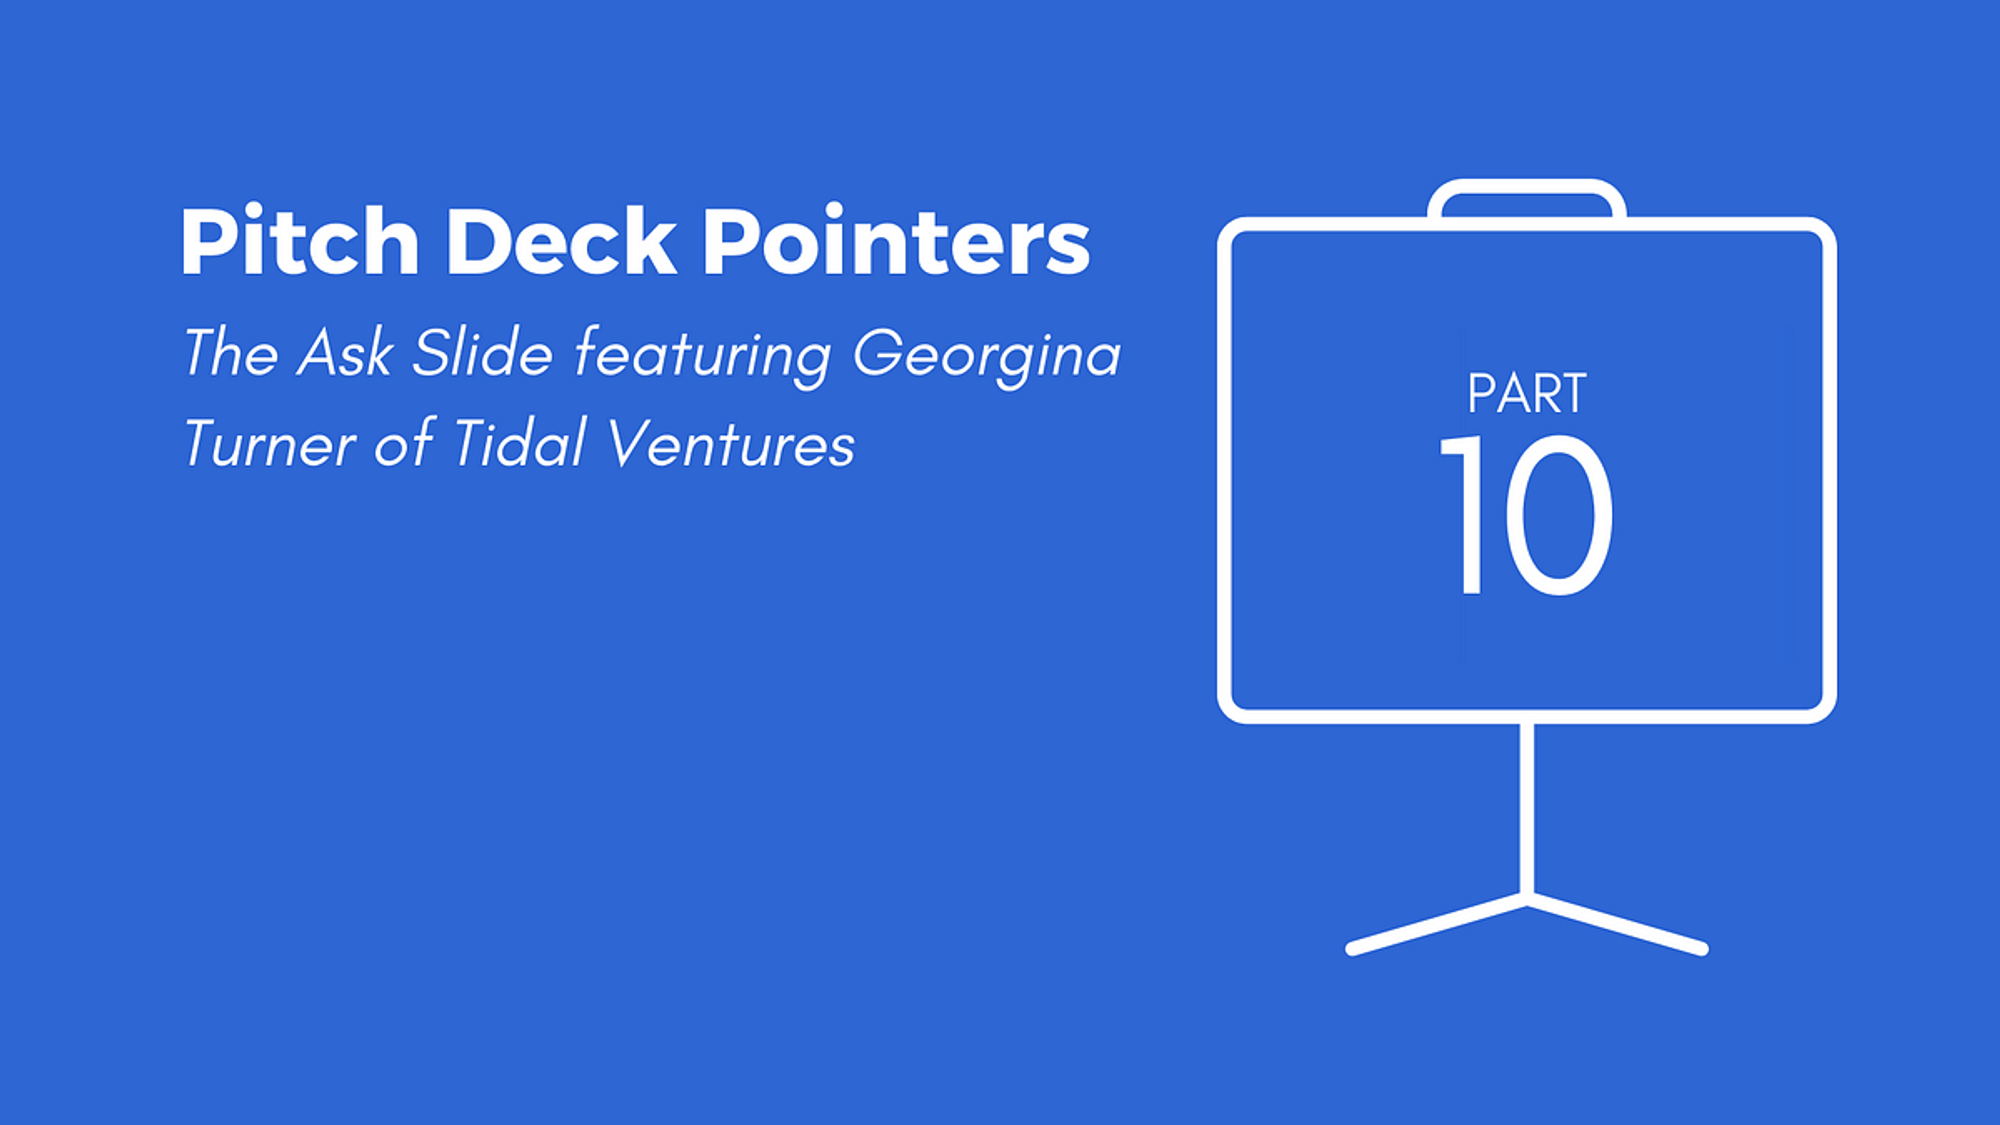 Pitch Deck Pointers Part 10: The Ask Slide